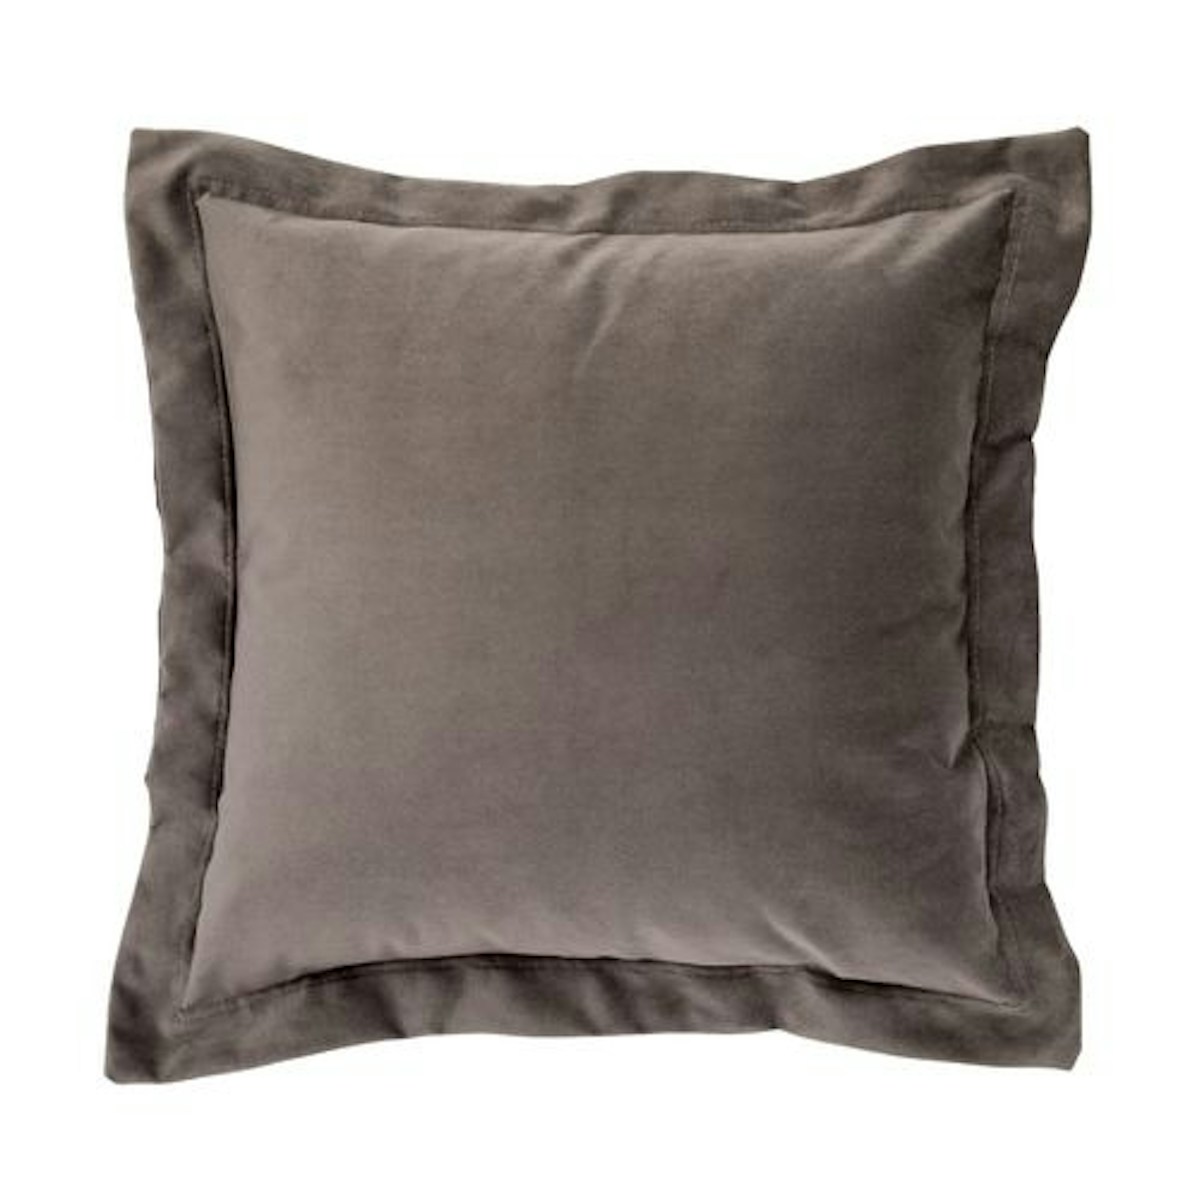 Thunder Grainger Cushion - 9 Best Luxury Cushions to Buy for your Home - Style Guide - LuxDeco.com